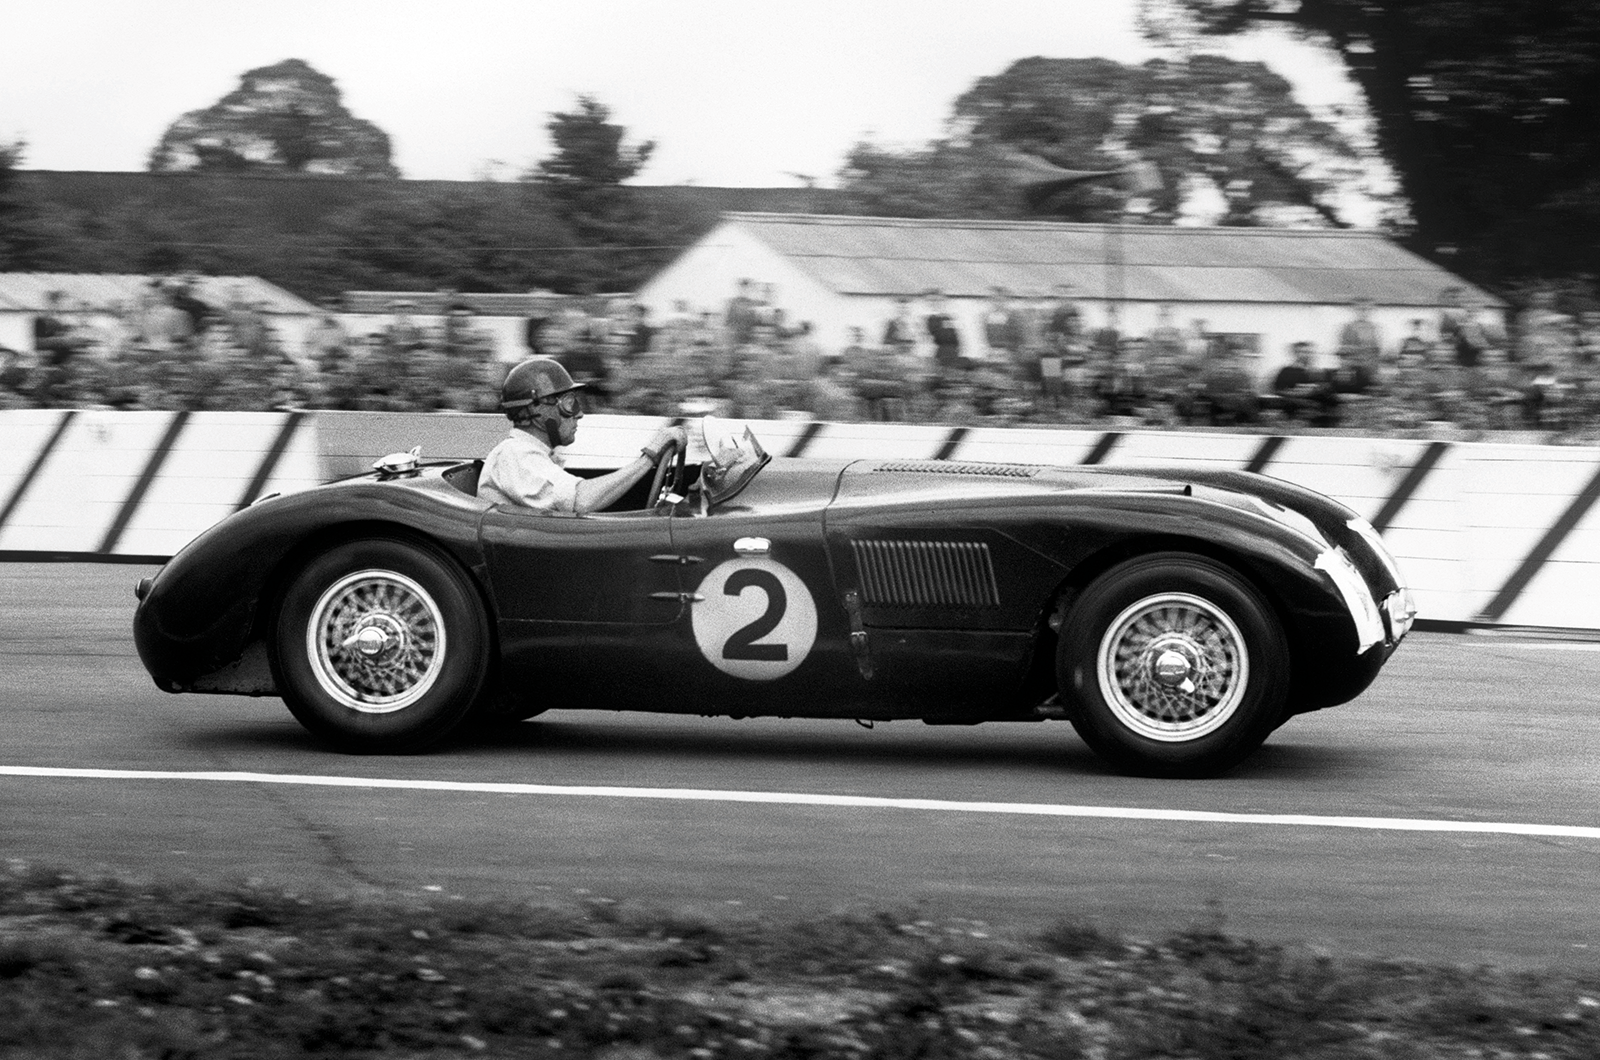 Classic & Sports Car – Revival ’19: D-Day’s motor-racing heroes